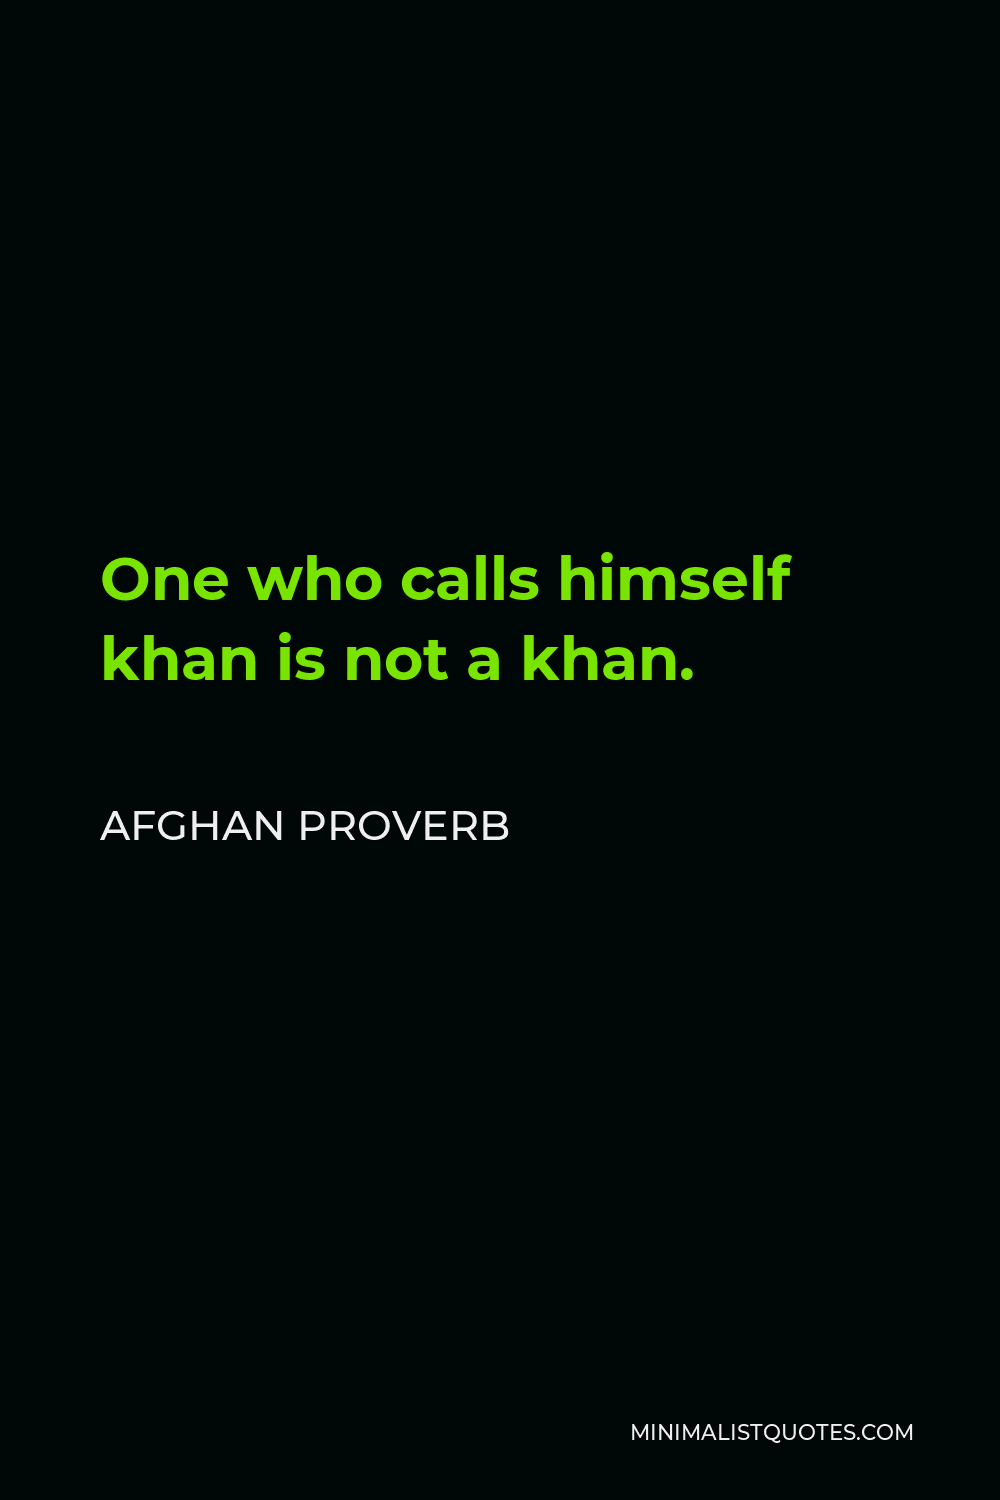 Afghan Proverb Quote - One who calls himself khan is not a khan.